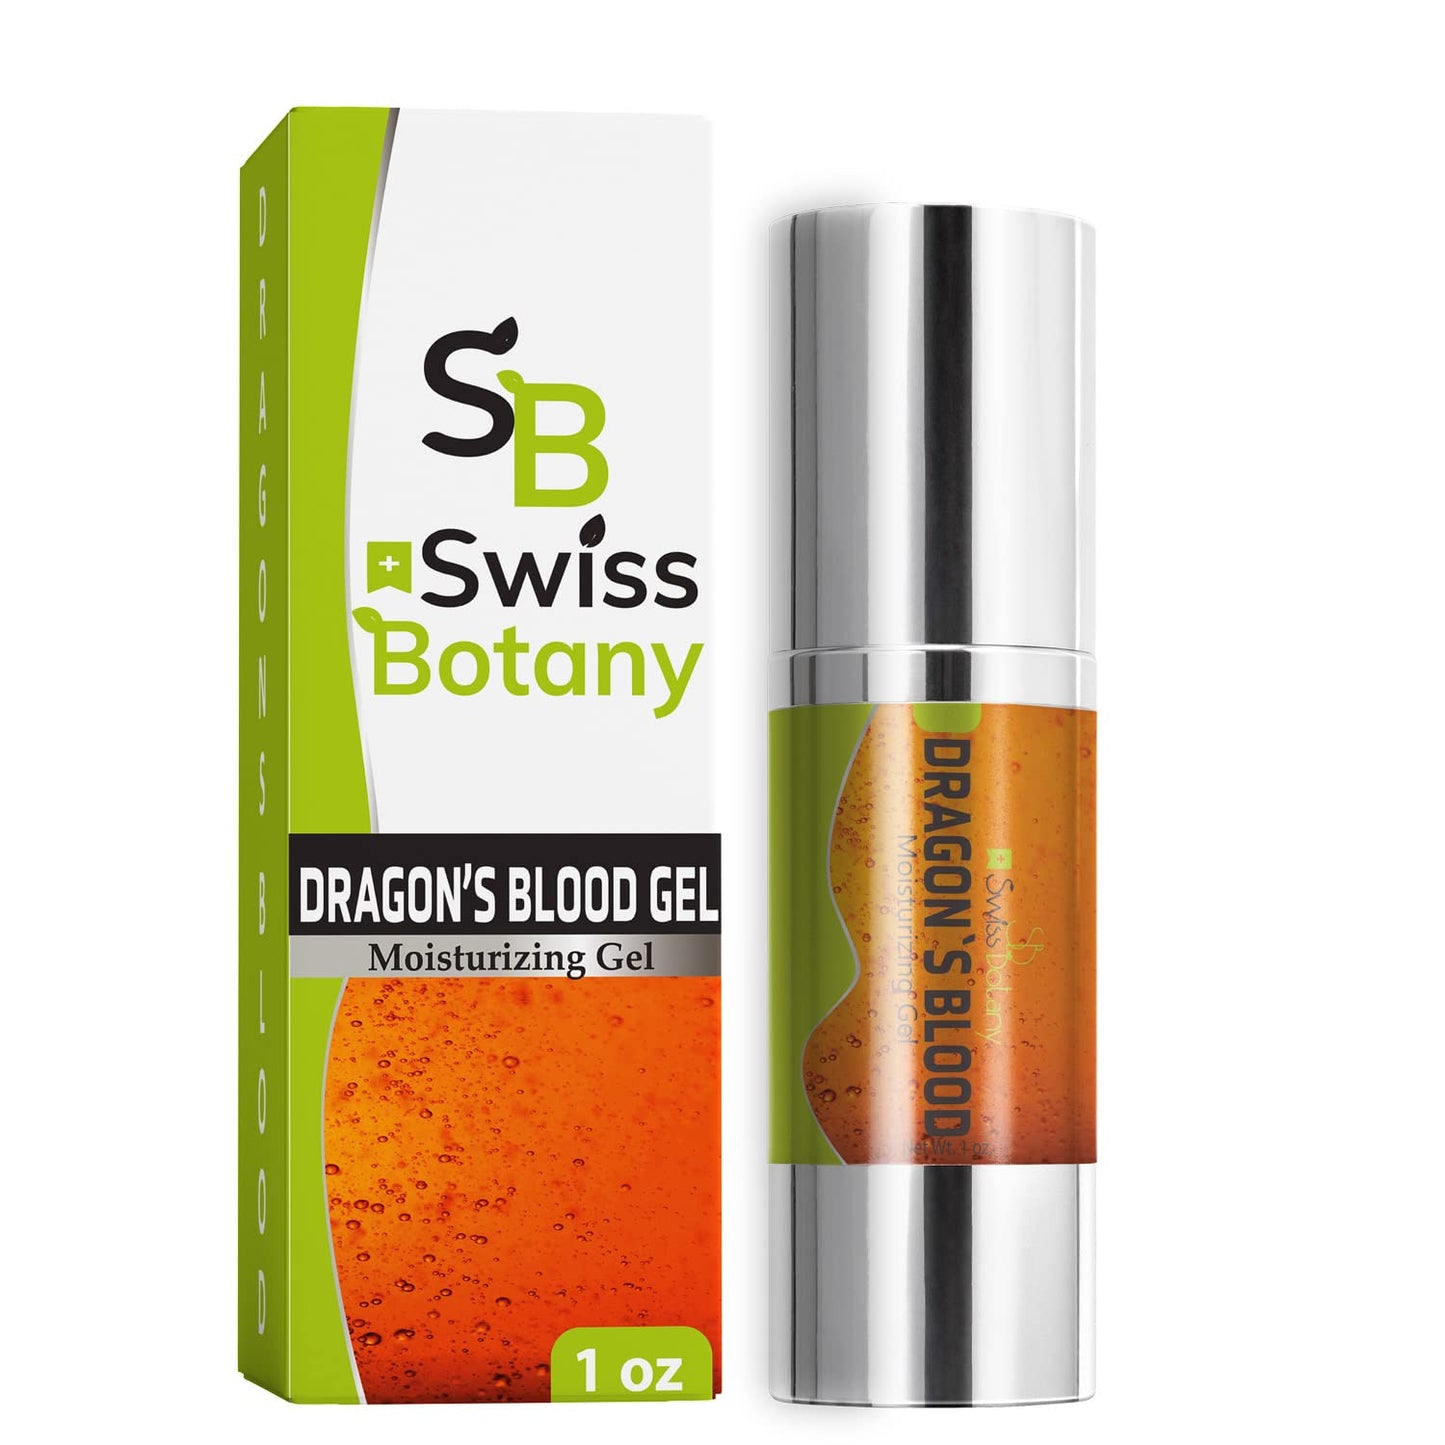 Swiss Botany Beauty 1 Ounce (Pack of 1) / Orange / 1 Dragons Blood Sculpting Gel Face Moisturizer - Anti Aging Face Moisturizer for Women Reduces Appearance of Fine Lines and Wrinkles - Moisturizer Gel Tightens and Restores Skin Elasticity - Fragrance Free, 1 Ounce by SwissBotany